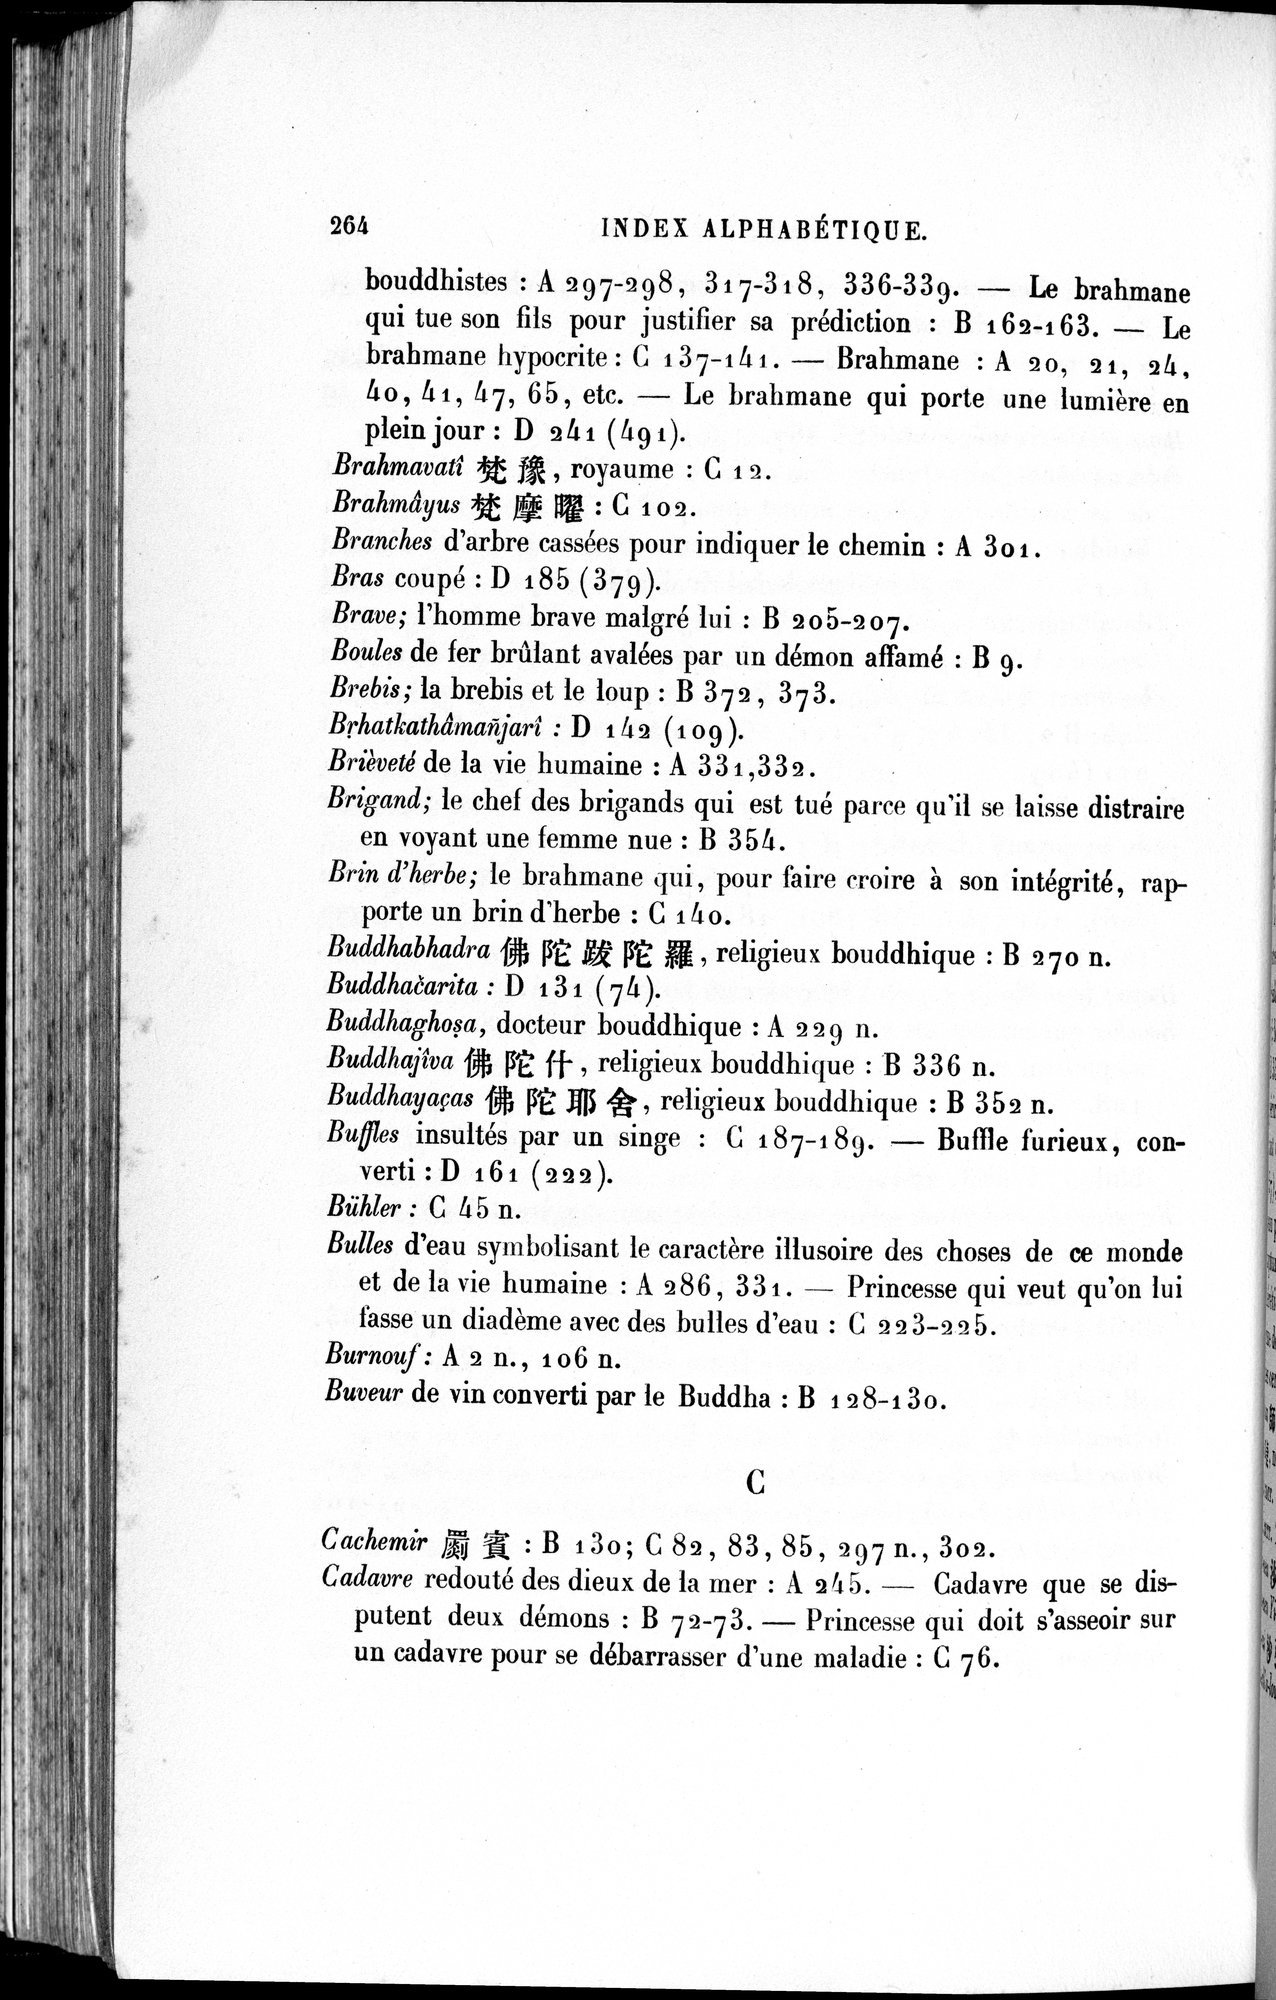 Cinq Cents Contes et Apologues : vol.4 / Page 284 (Grayscale High Resolution Image)